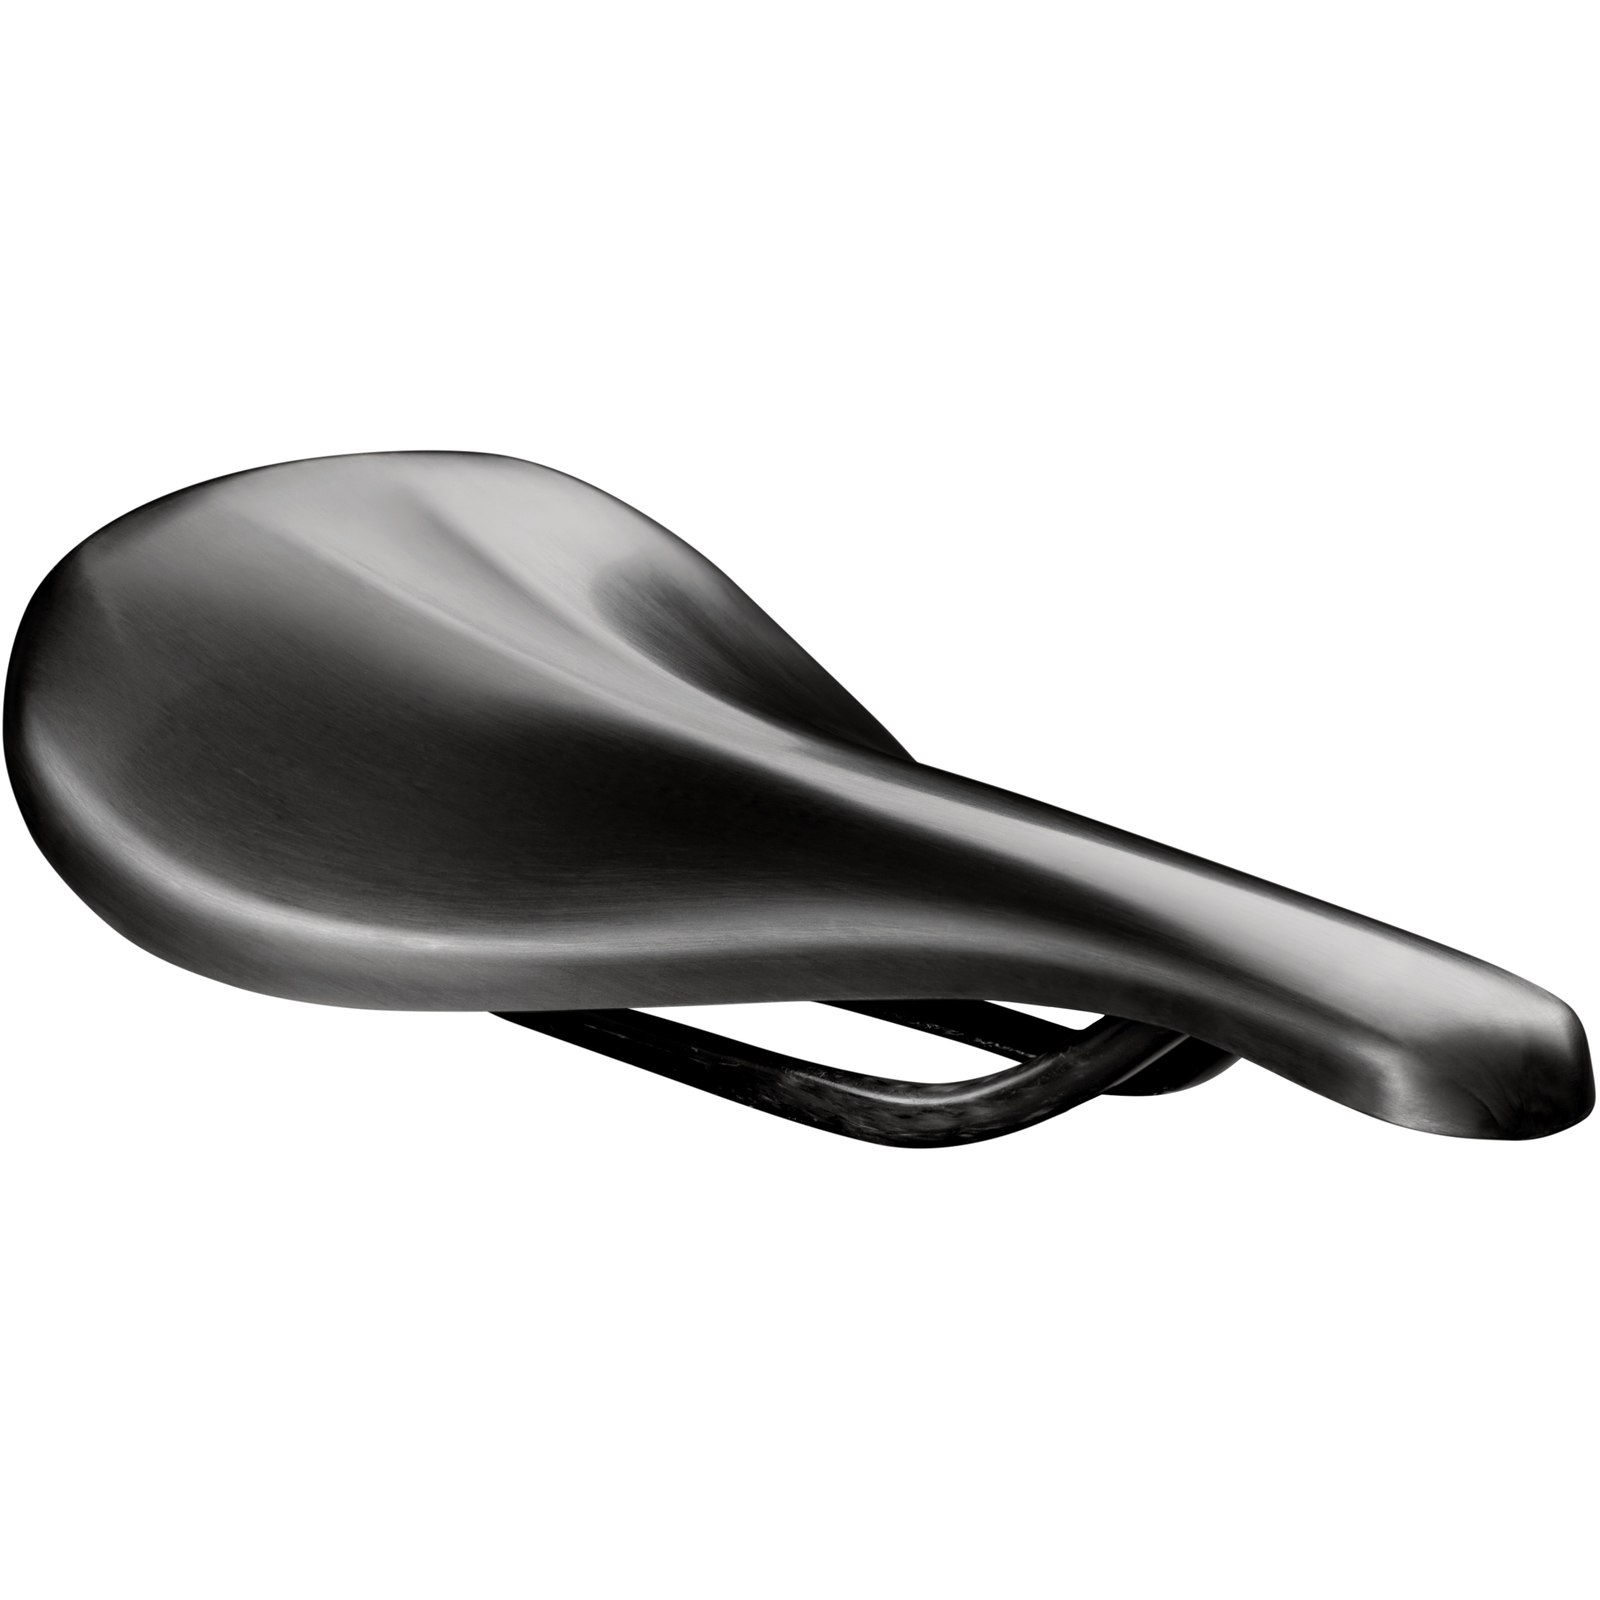 Image of Beast Components Pure Carbon Saddle - 130mm, UD black